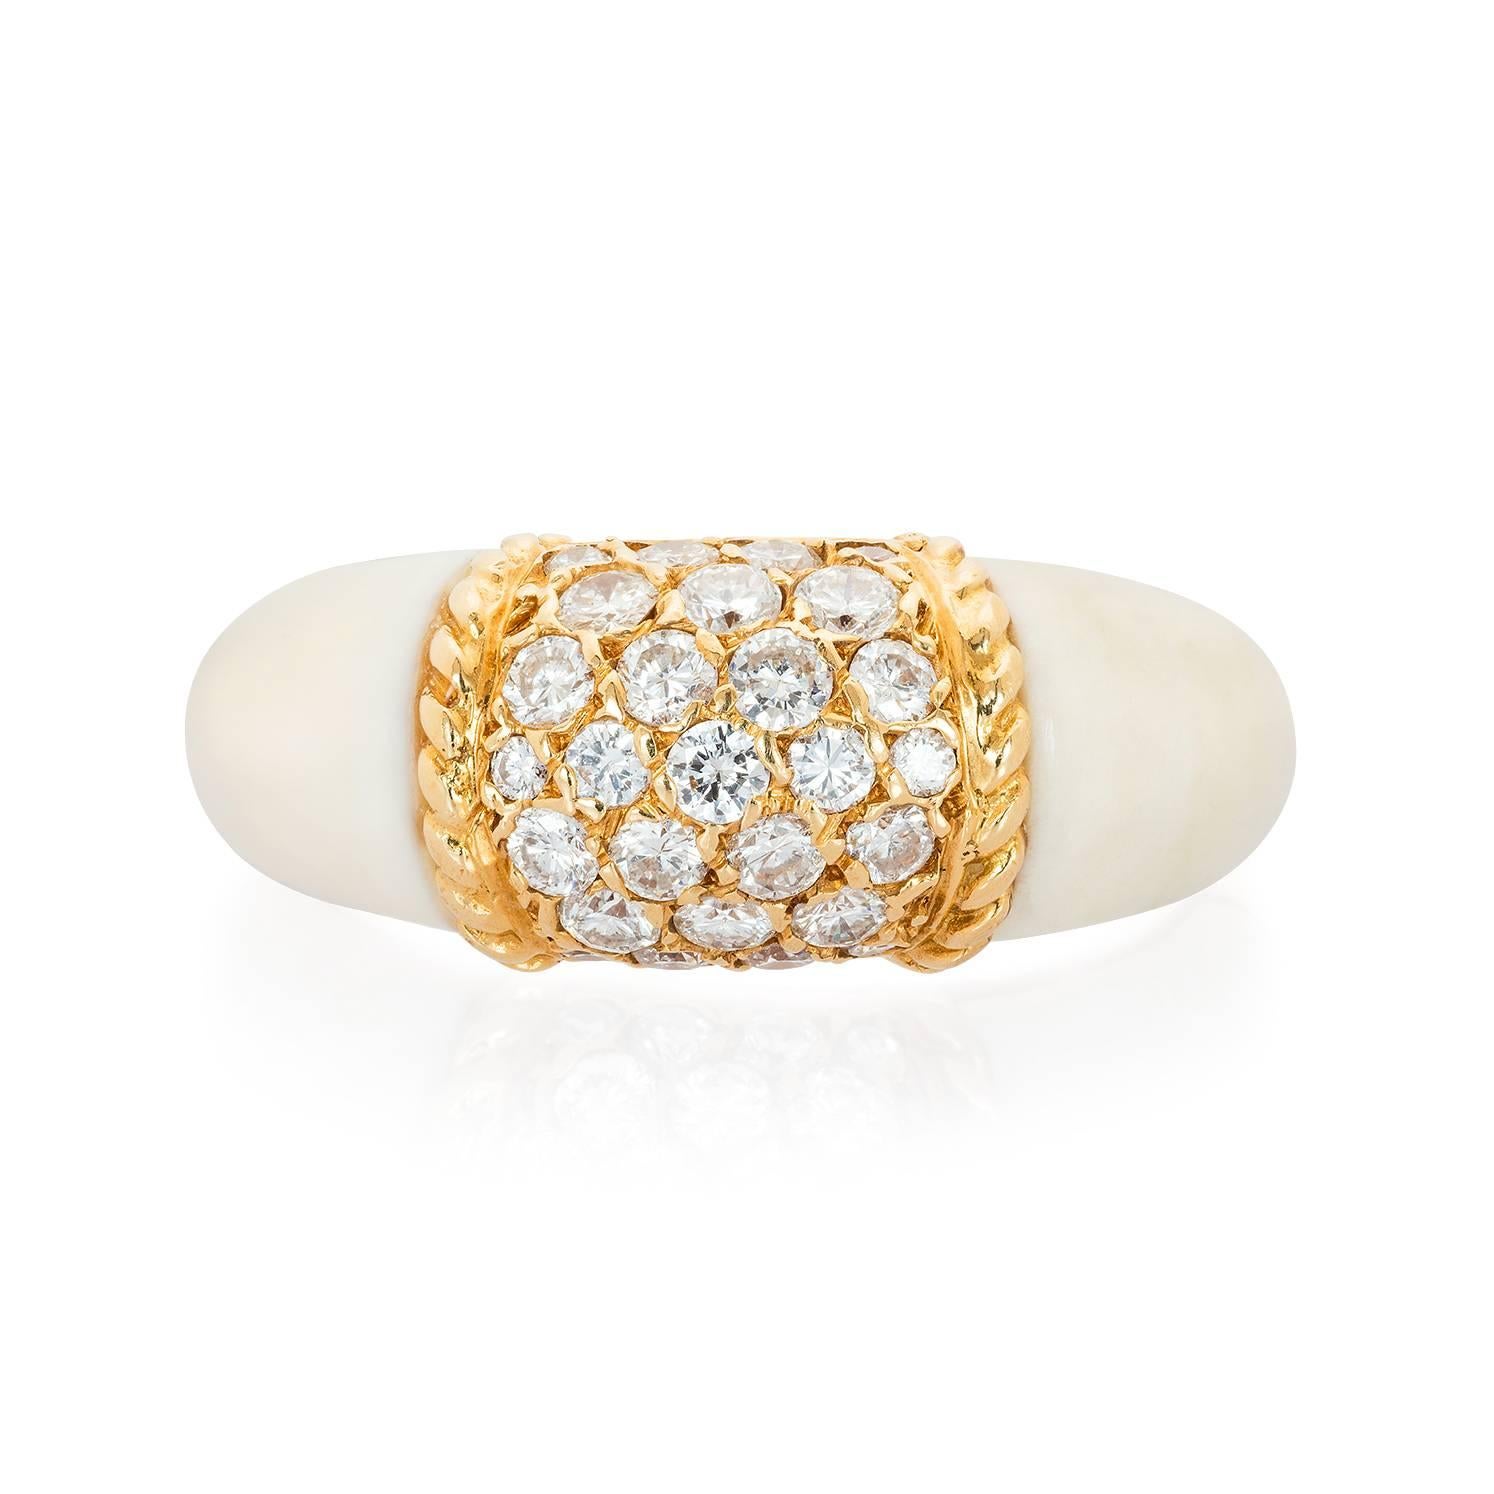 A rare white coral 'Philippine' ring by Van Cleef & Arpels, the larger than usual ring set to the centre with 27 round diamonds framed by a gold ropetwist border and flanked by white coral shoulders. Set in 18KT yellow gold. Signed and numbered,